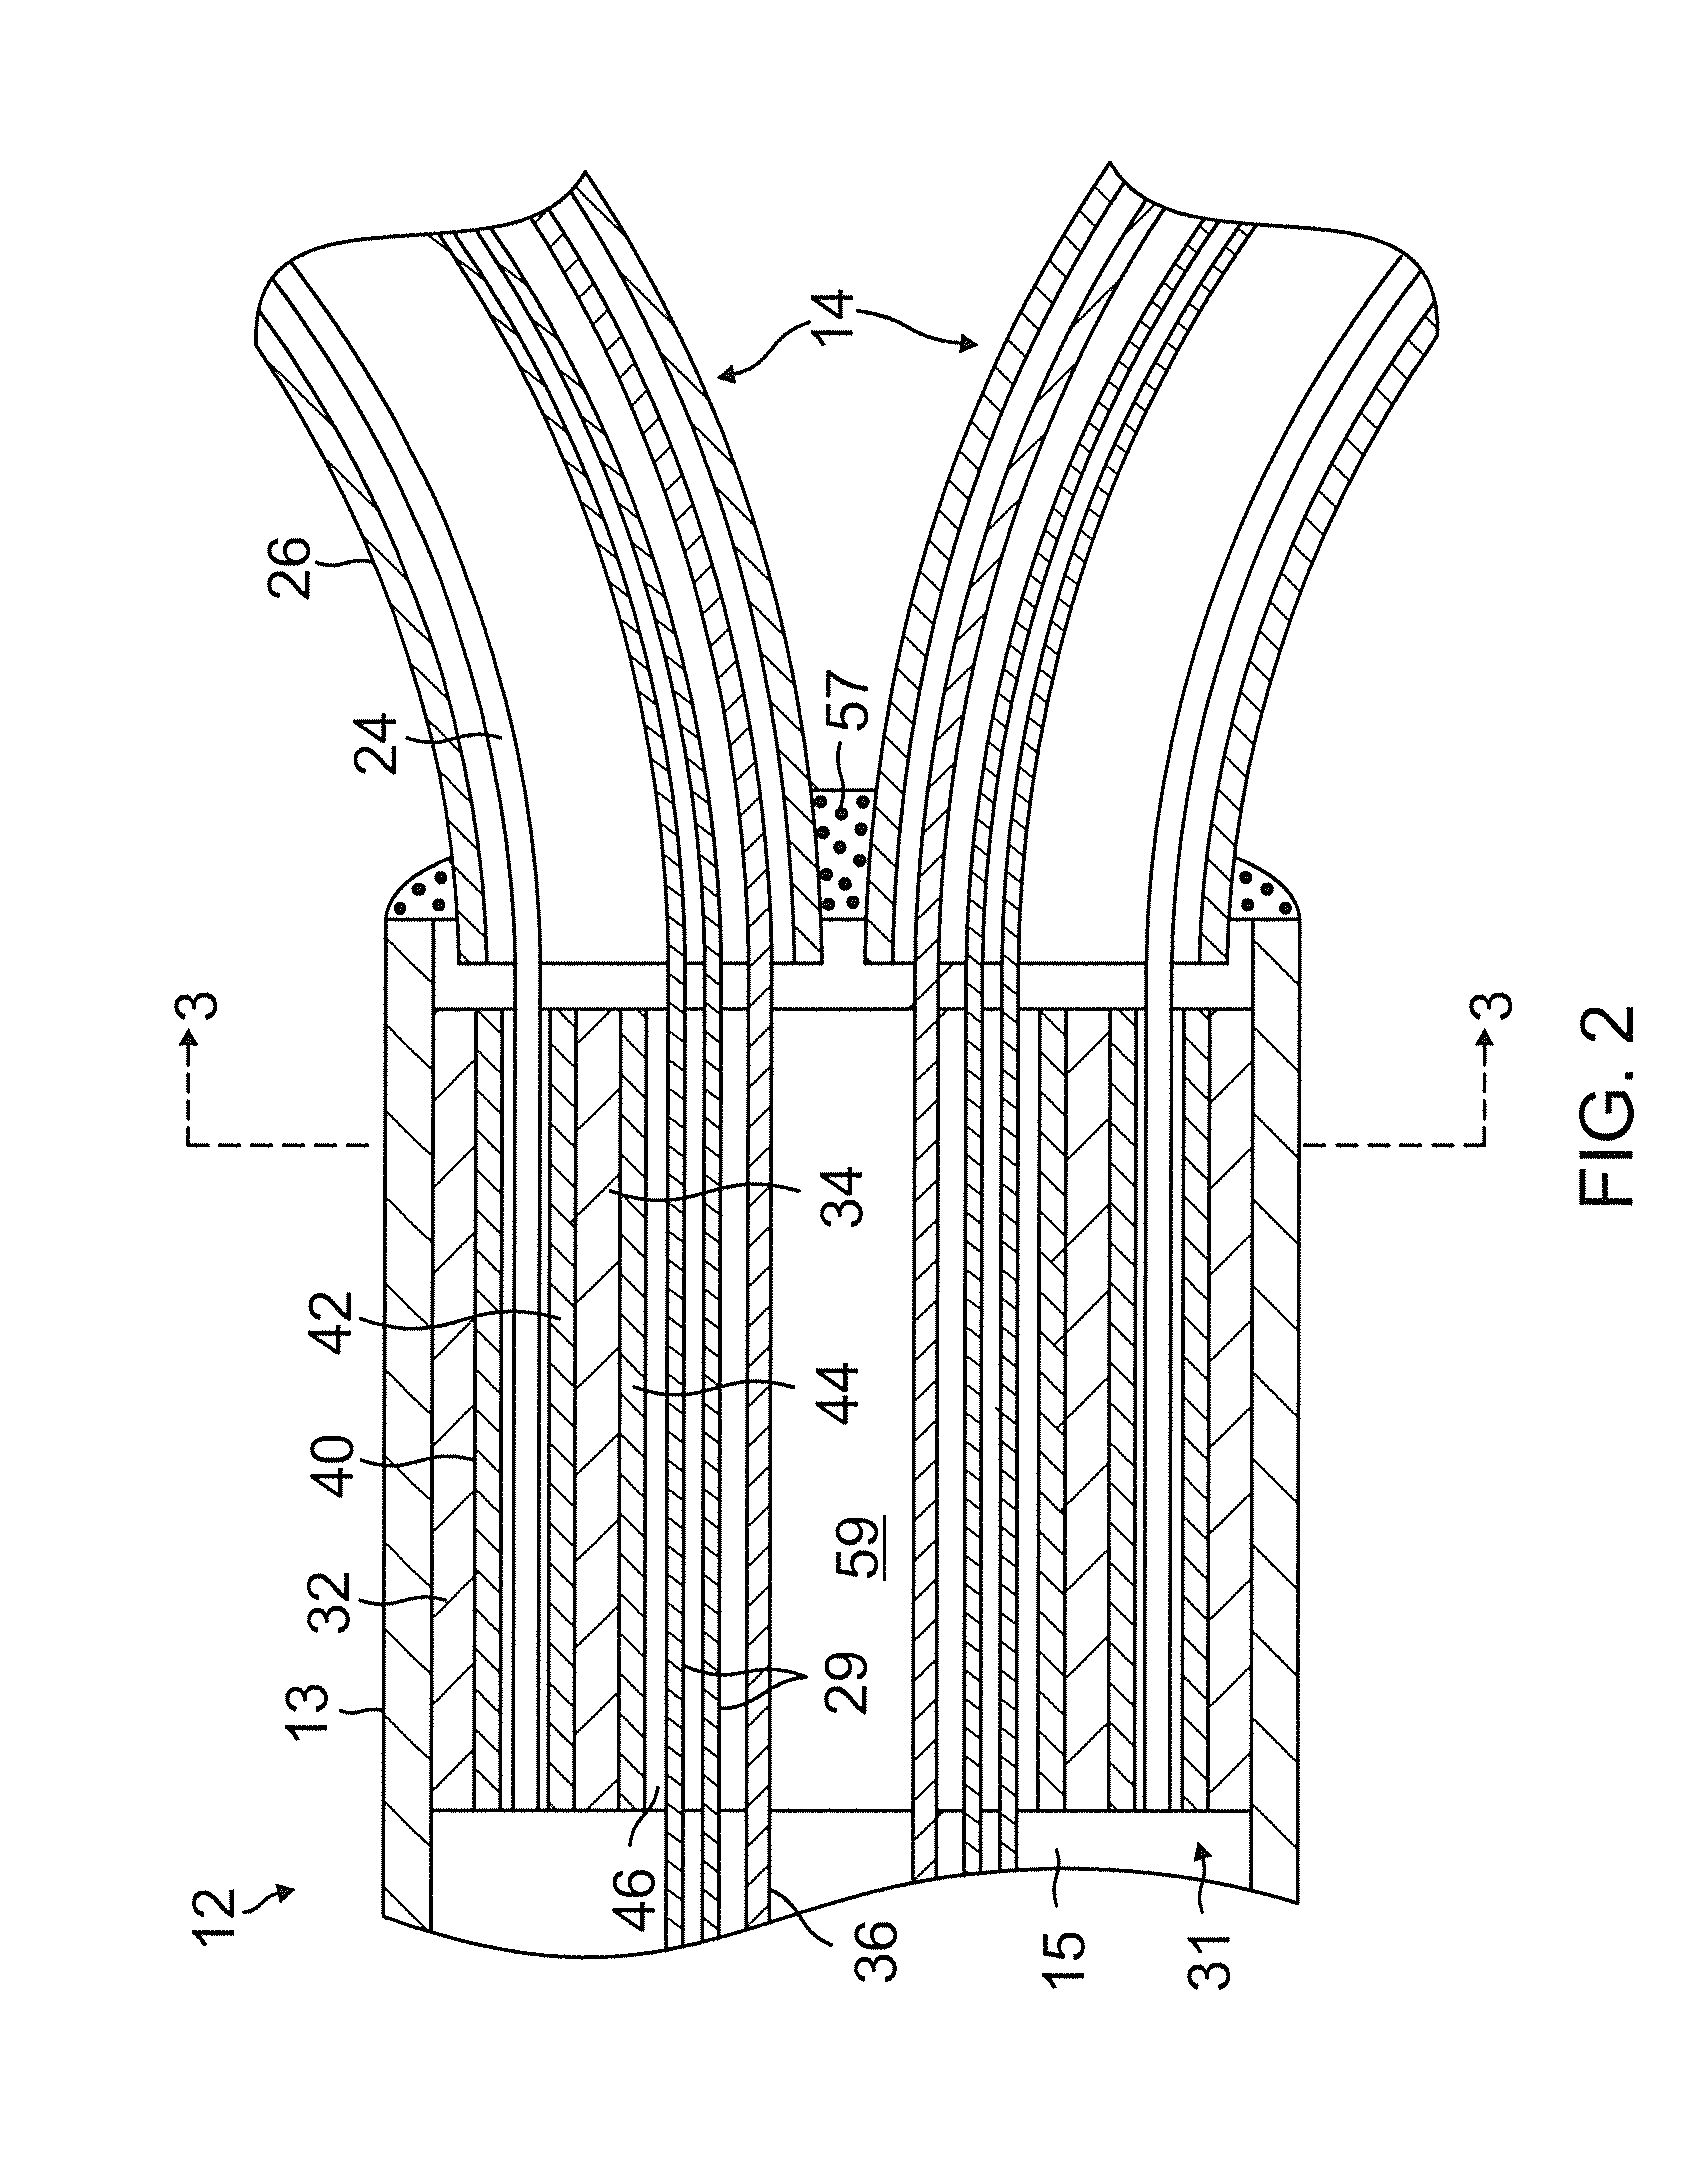 Catheter with multiple spines of different lengths arranged in one or more distal assemblies